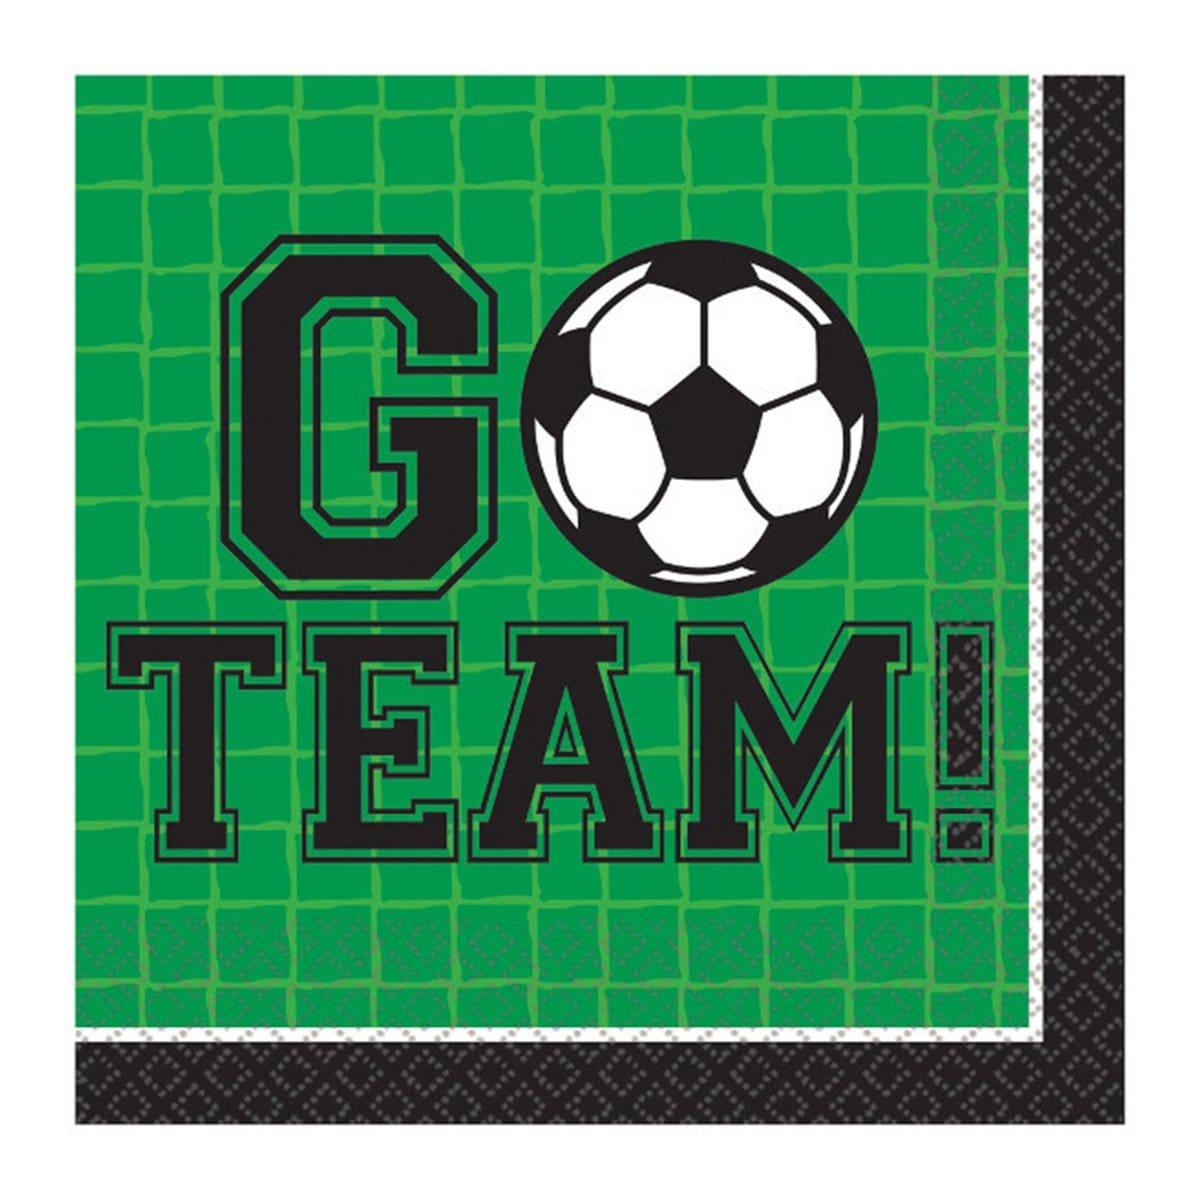 Buy Theme Party Goal Getter Beverage Napkins, 36 per Package sold at Party Expert